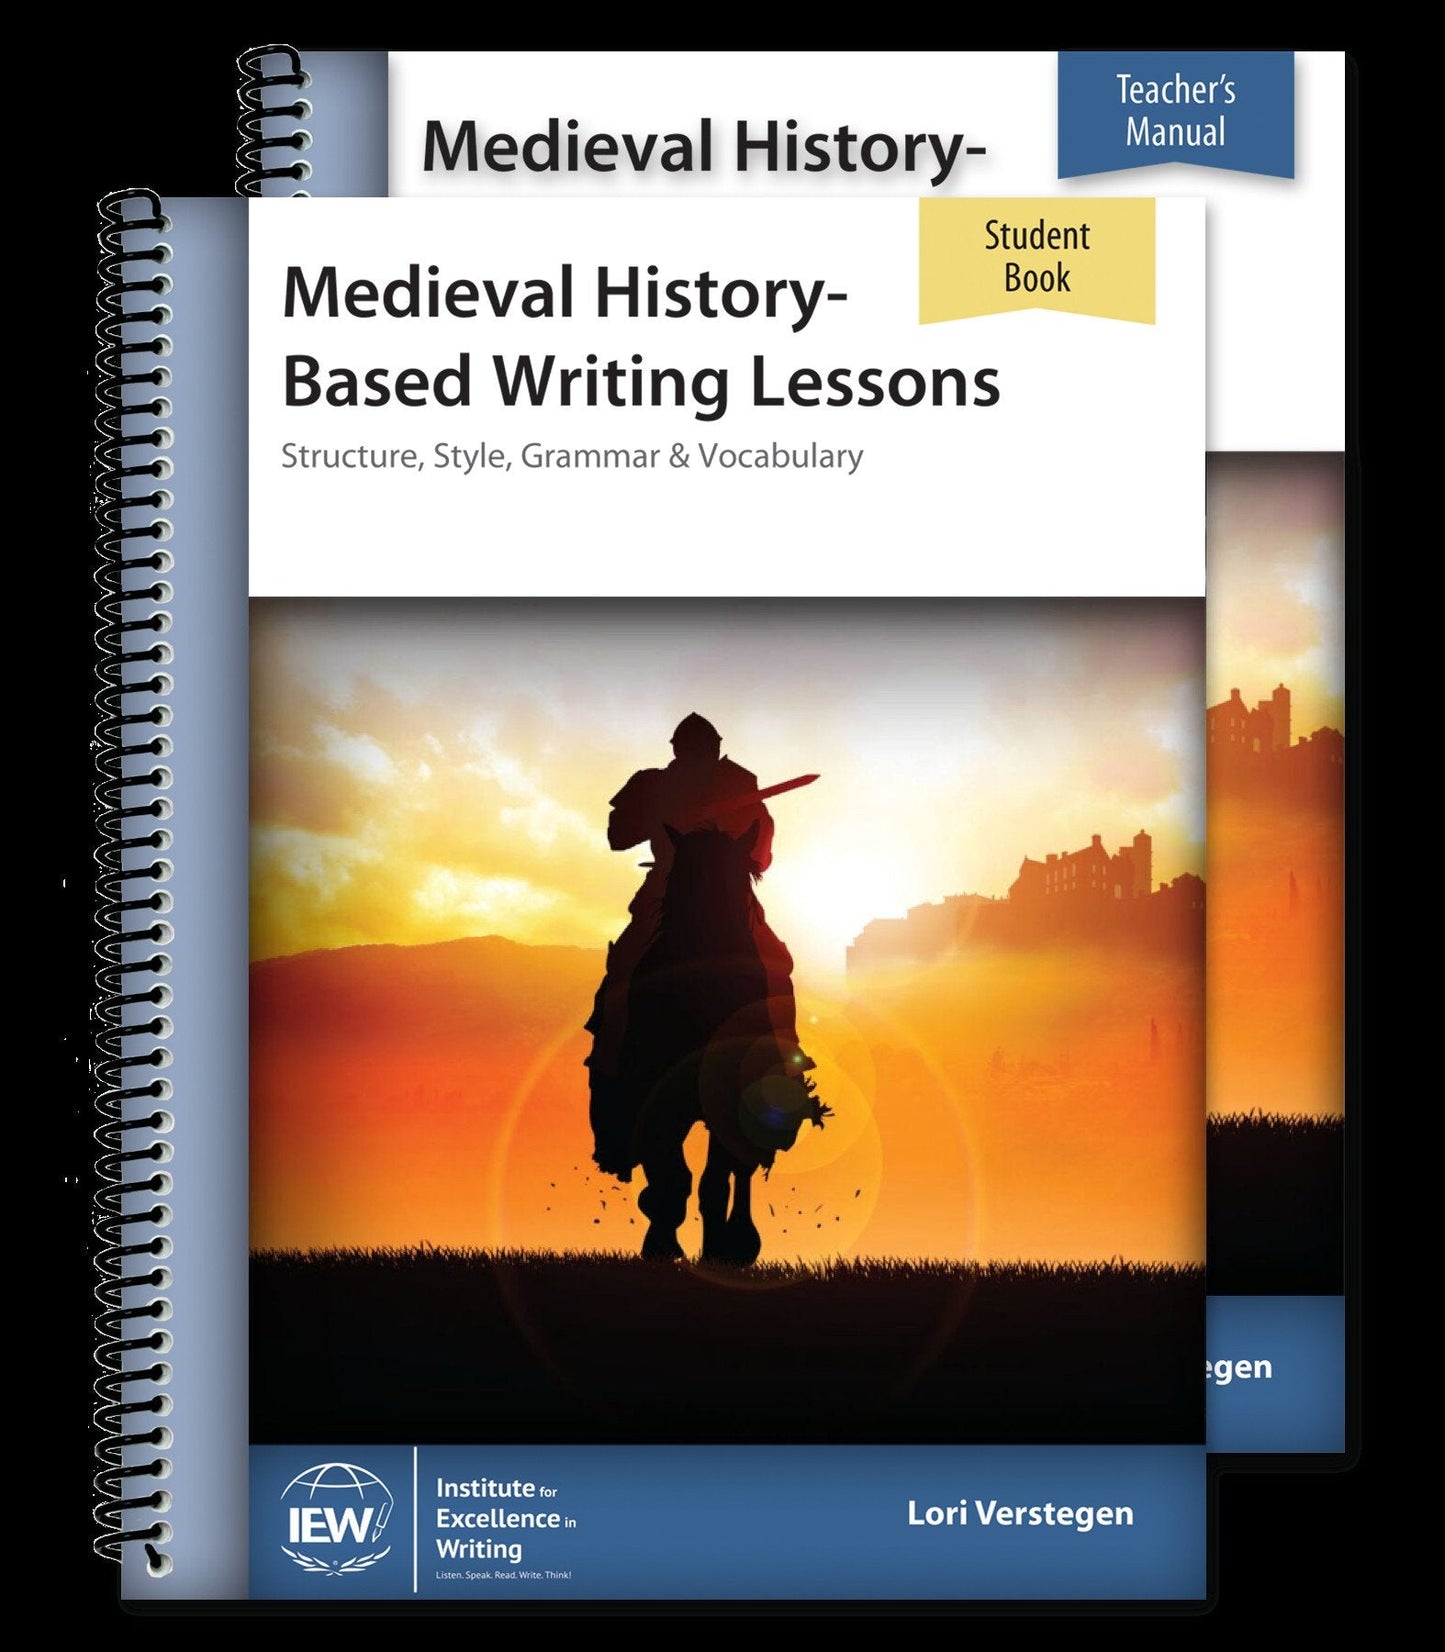 Medieval History - Based Writing lessons - set of 2